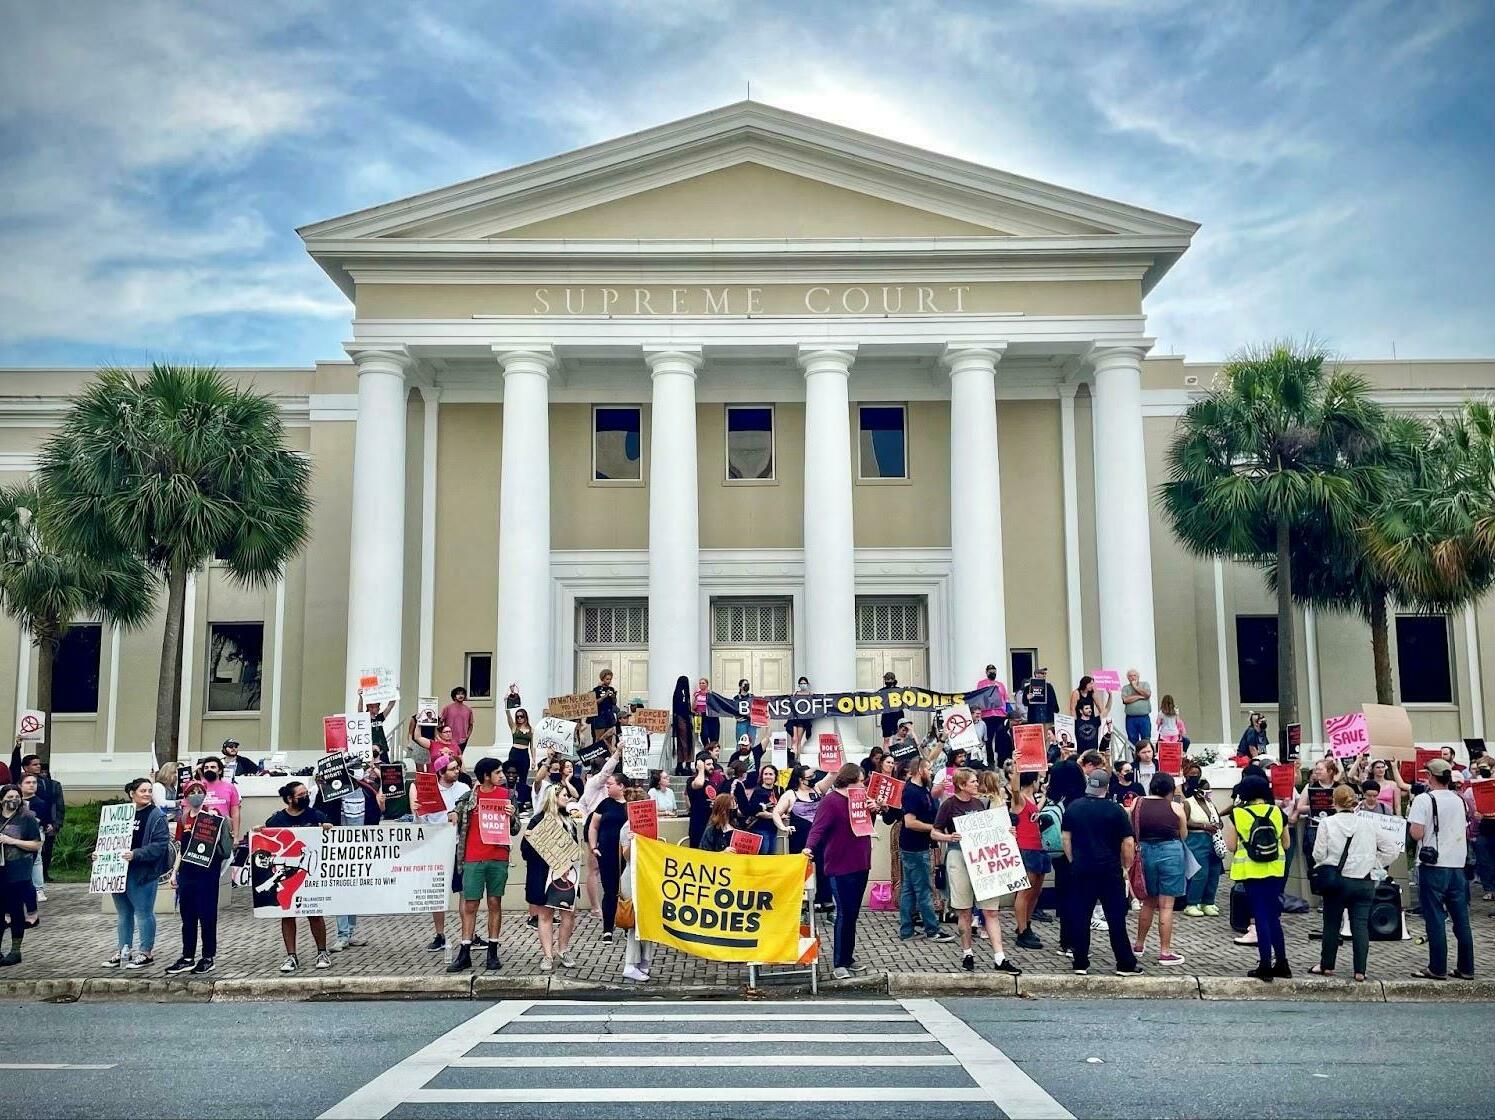 After the U.S. Supreme Court overturned Roe v. Wade in 2022, abortion access advocates rallied at the Florida Supreme Court. Monday the court issued rulings that could significantly impact access in the state.